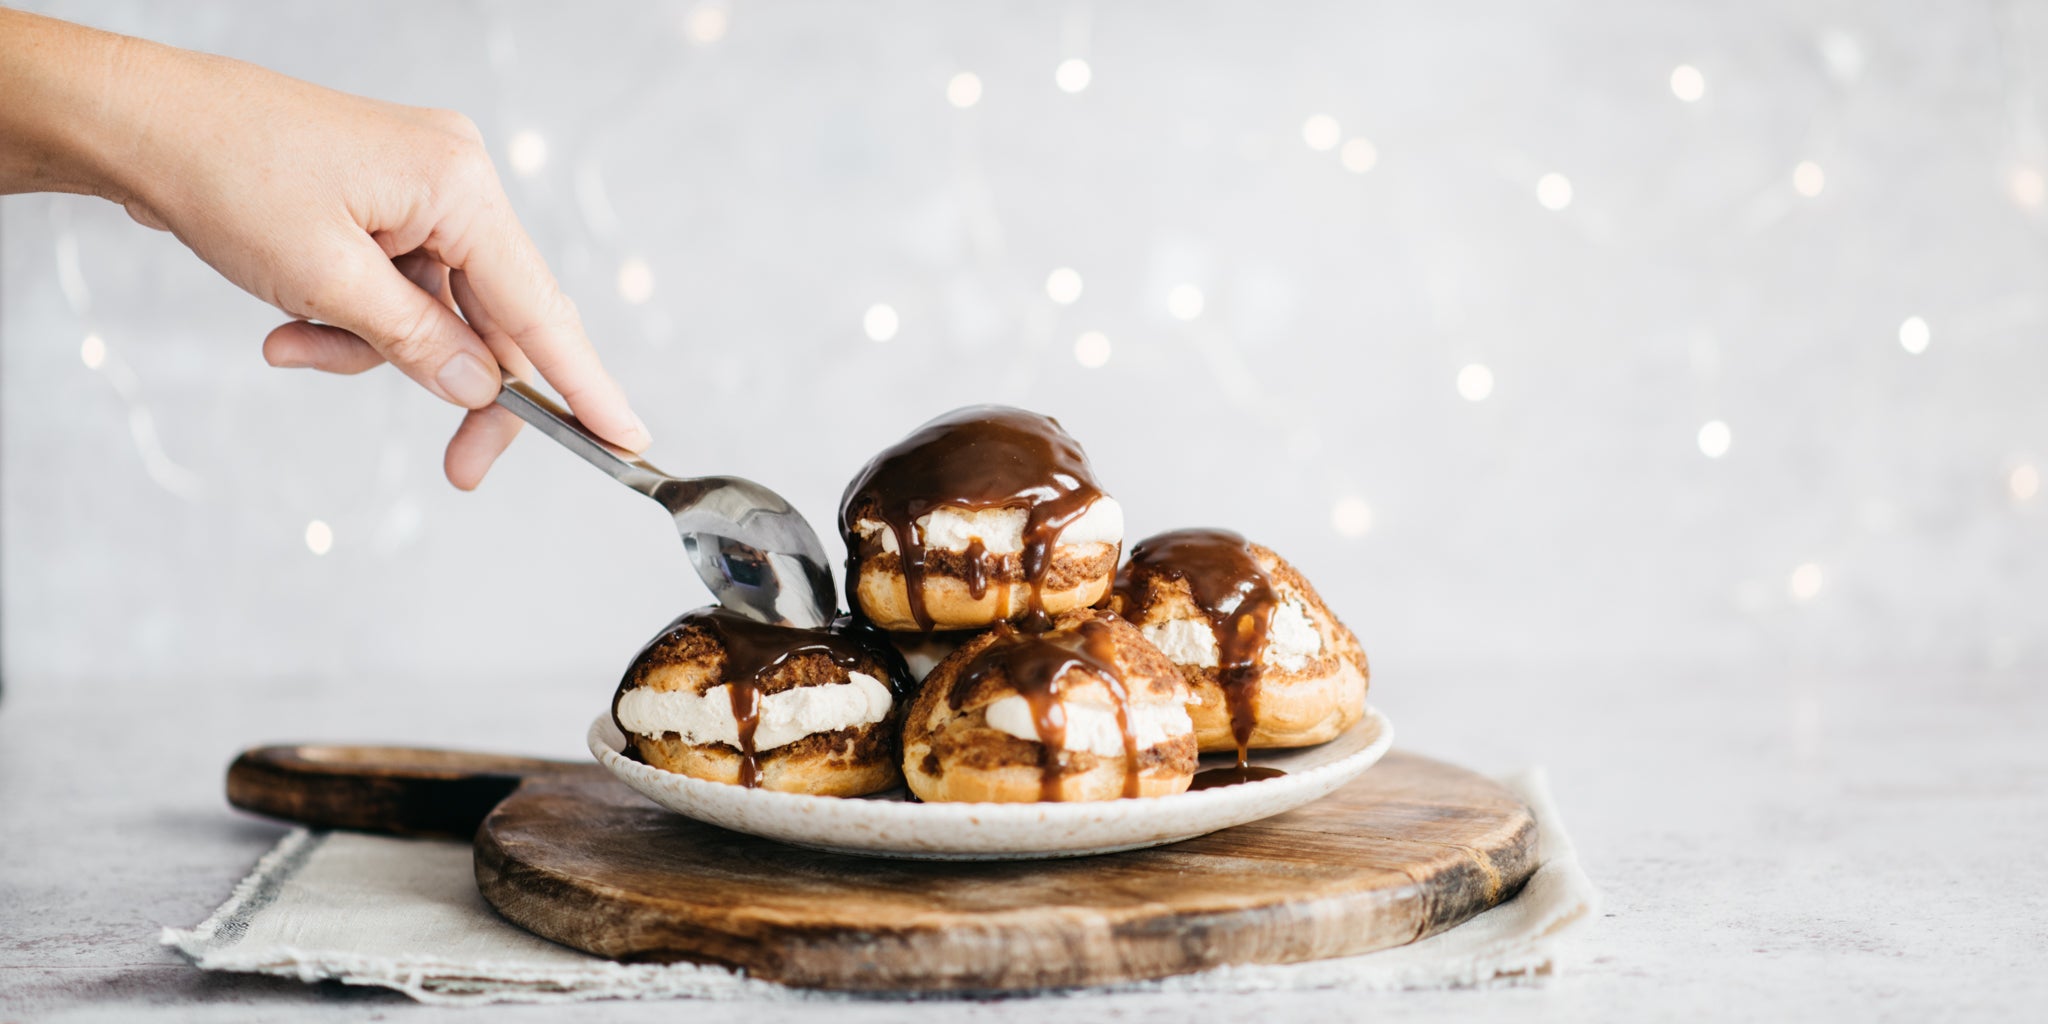 Hand reaching in with a spoon to take a bite of the profiteroles